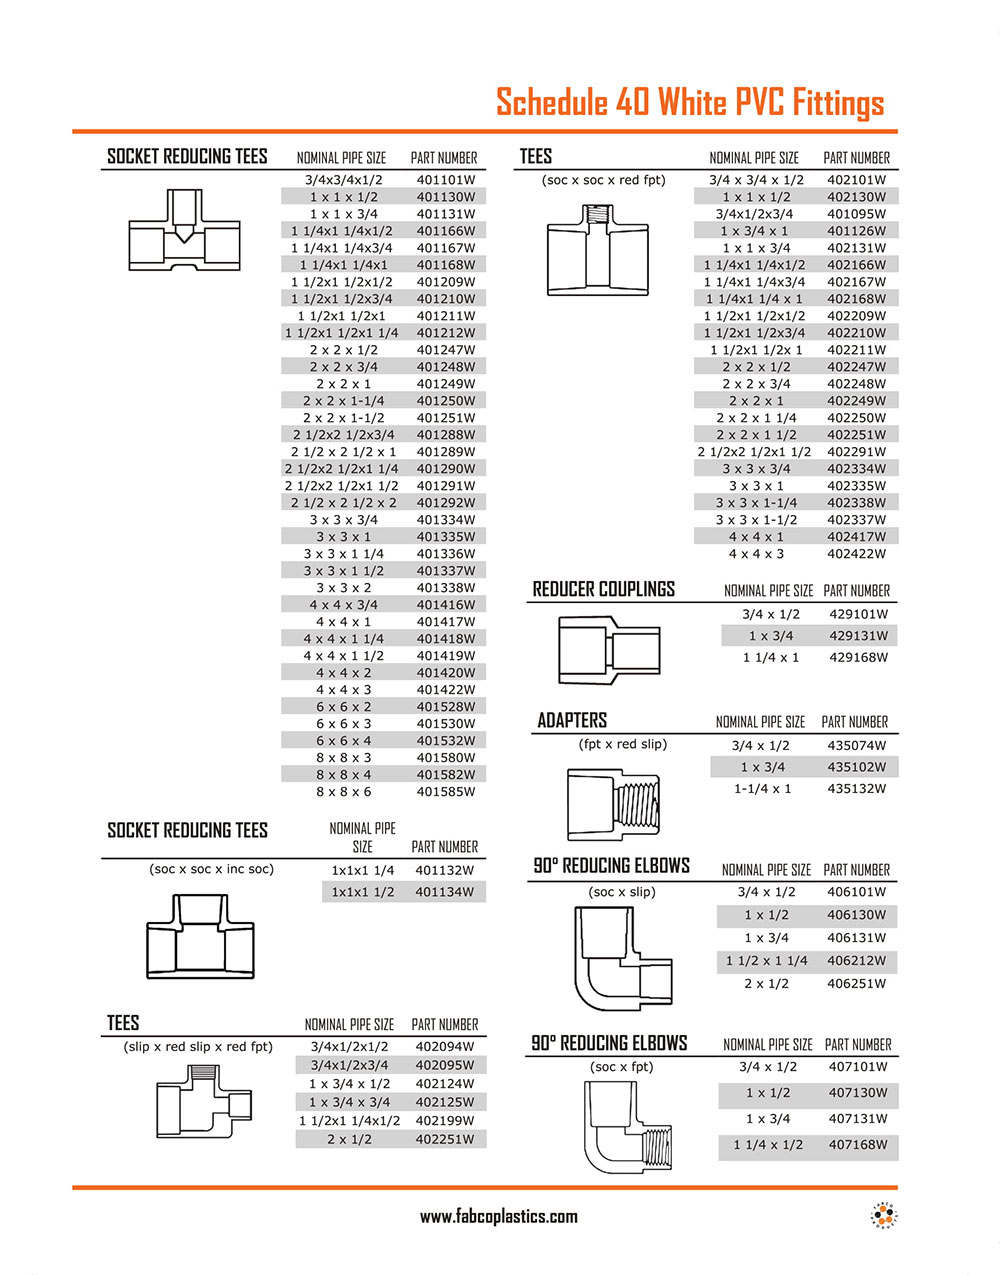 Schedule 40 White PVC Fittings